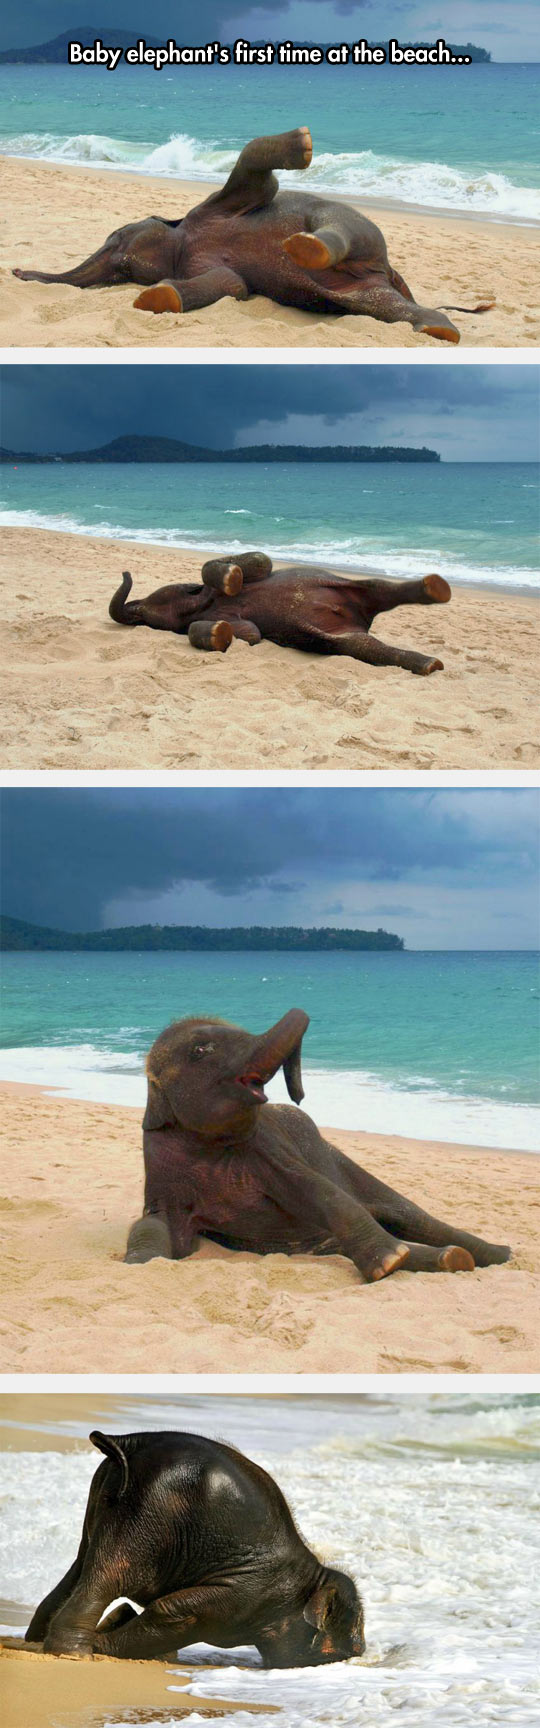 First time at the beach for baby elephant!